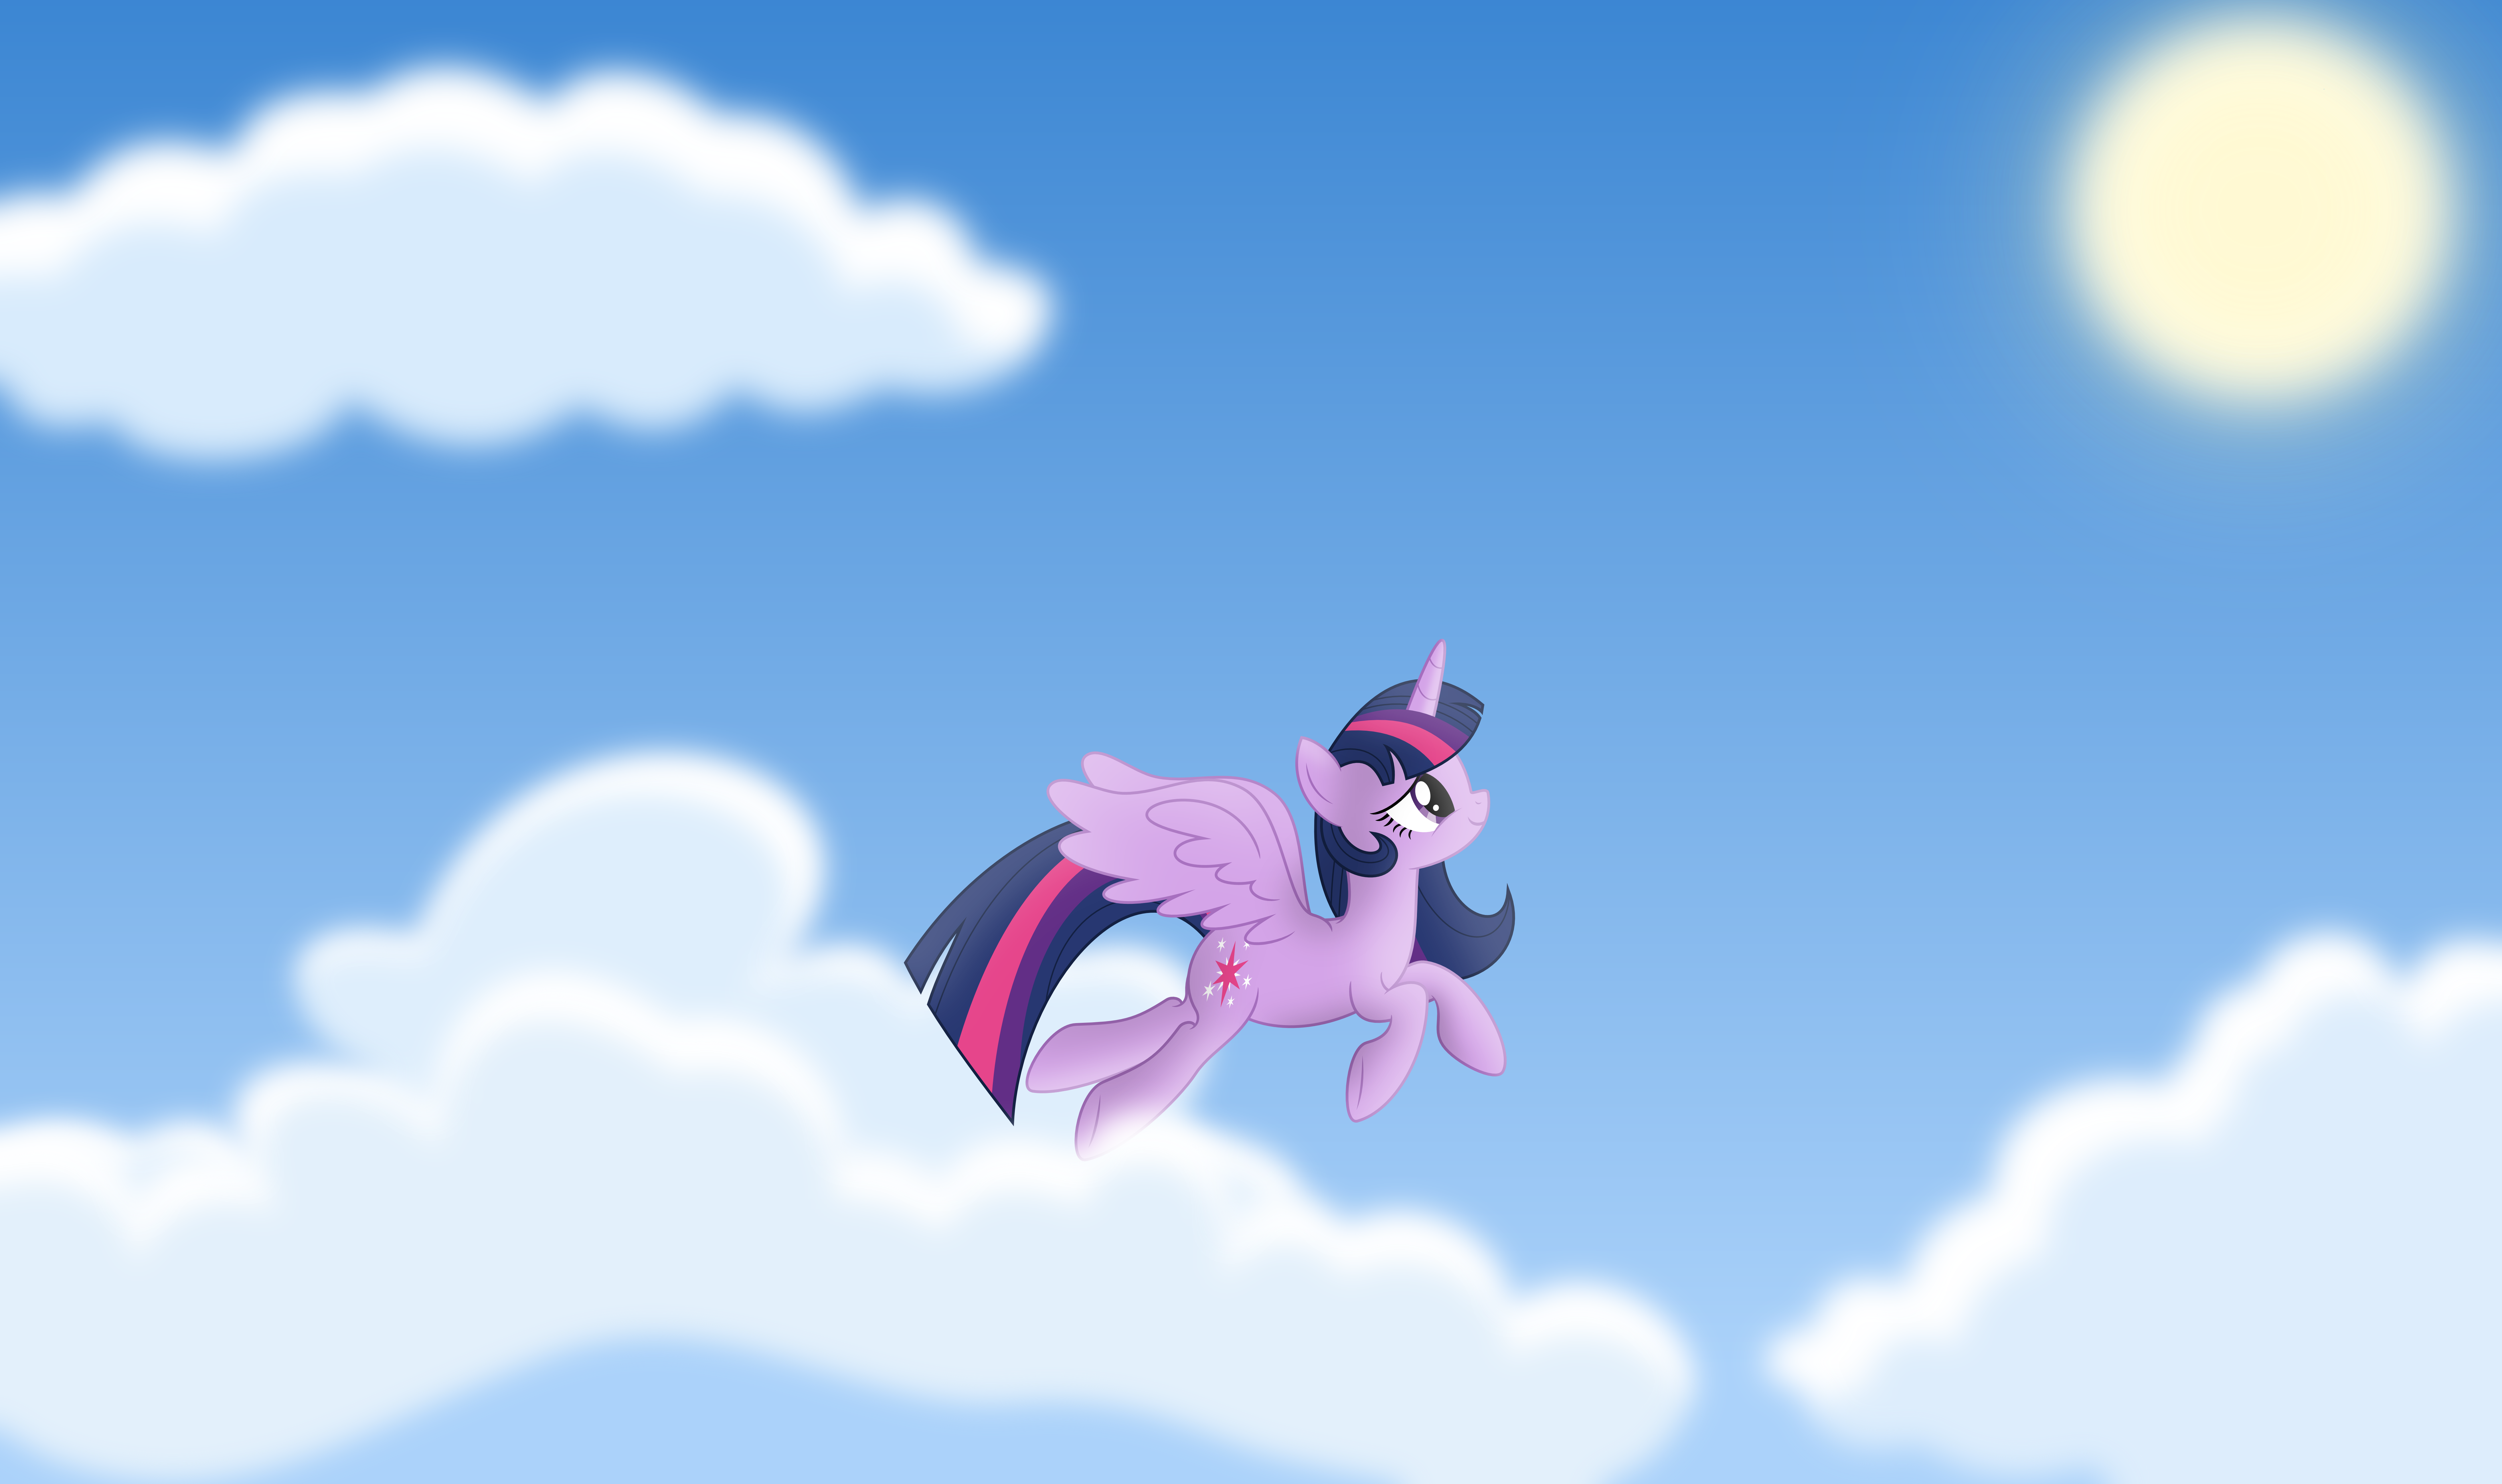 princess_twilight_sparkle_flying_by_psyxofthoros-d61f2dc.png